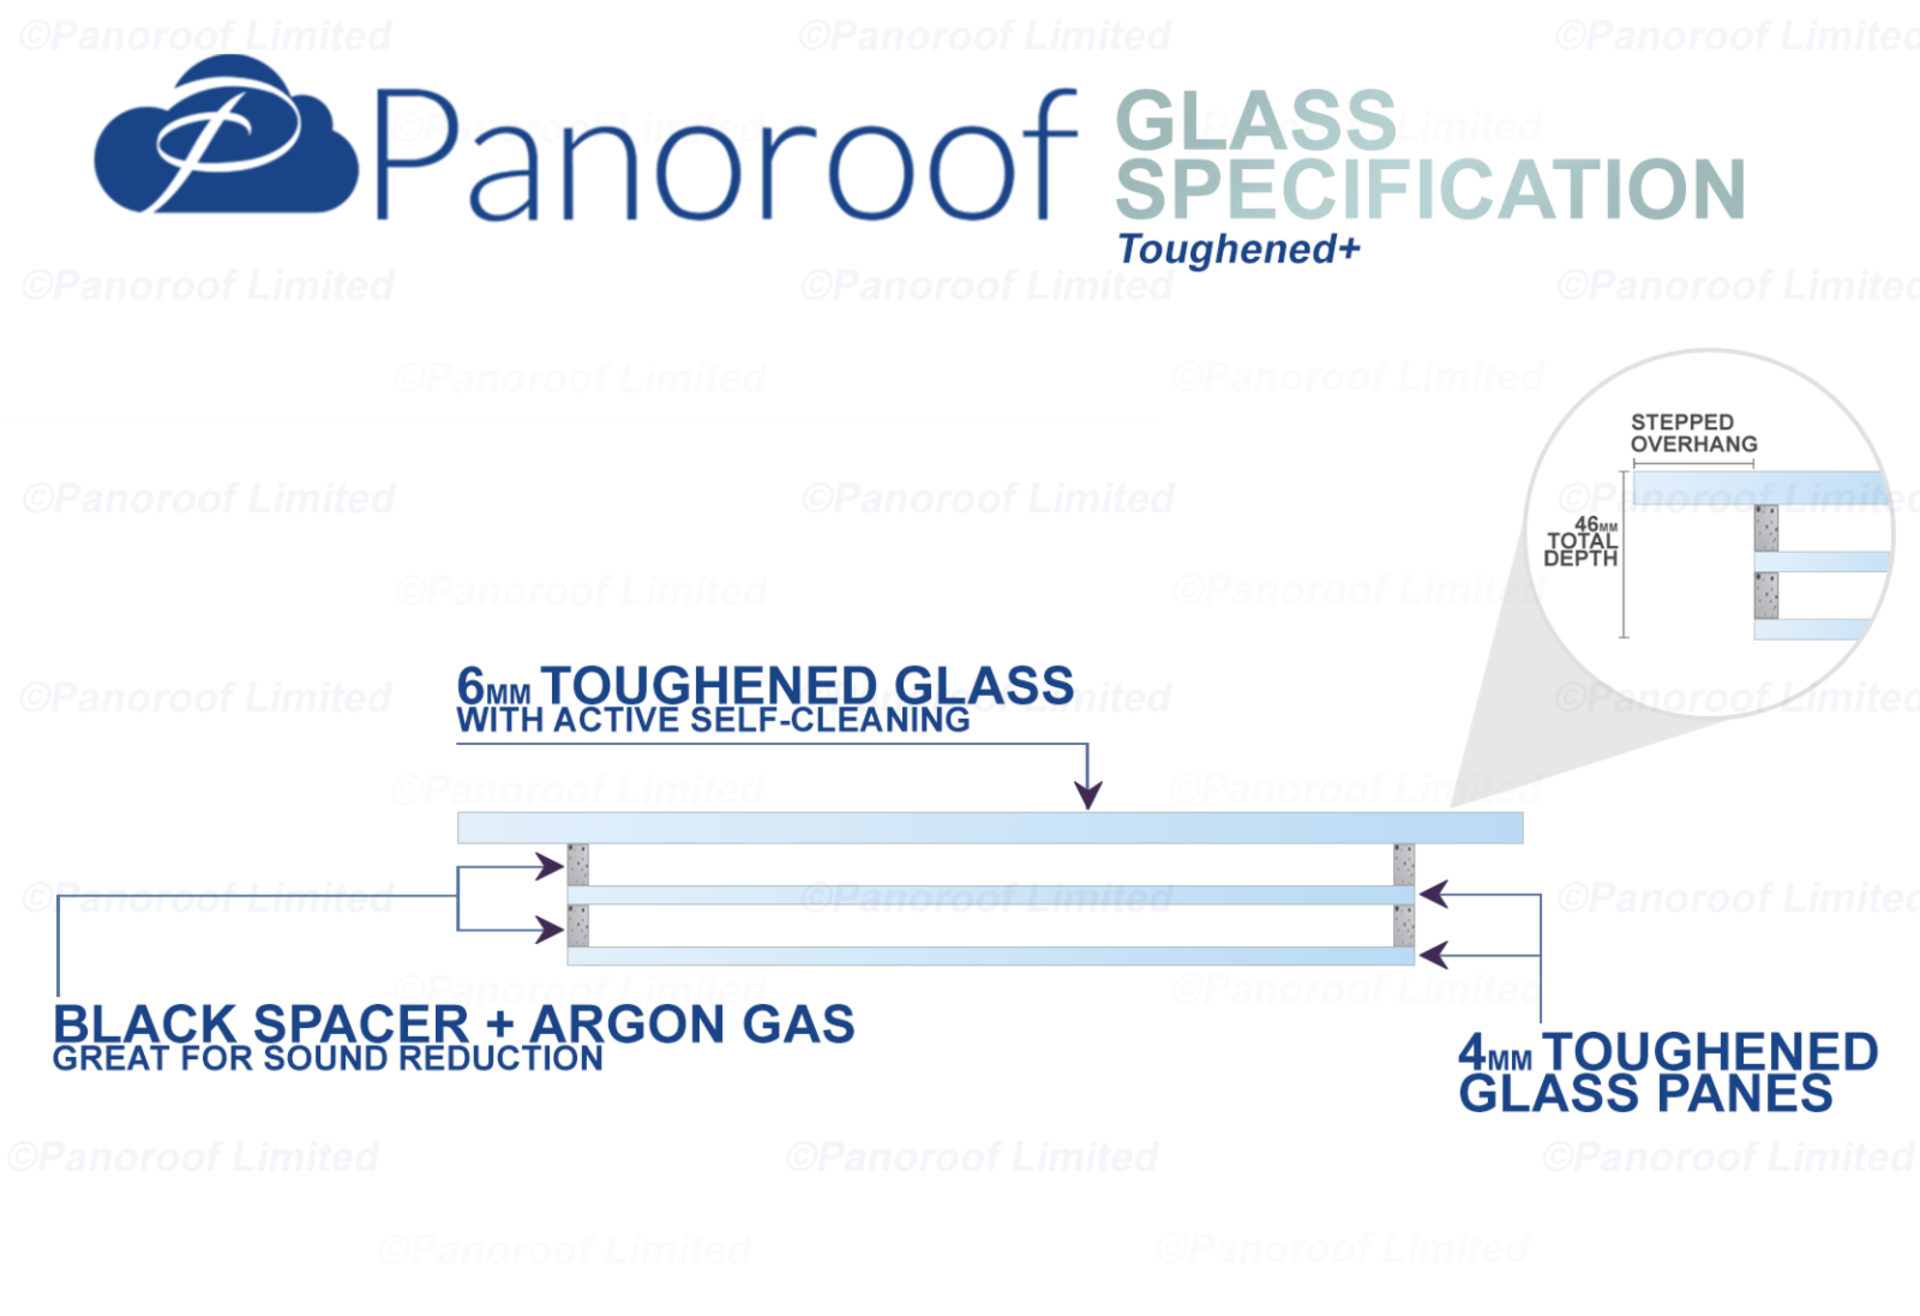 """Panoroof Triple Glazed Self Cleaning 900x900mm (inside Size Visable glass area) Seamless Glass - Image 4 of 6